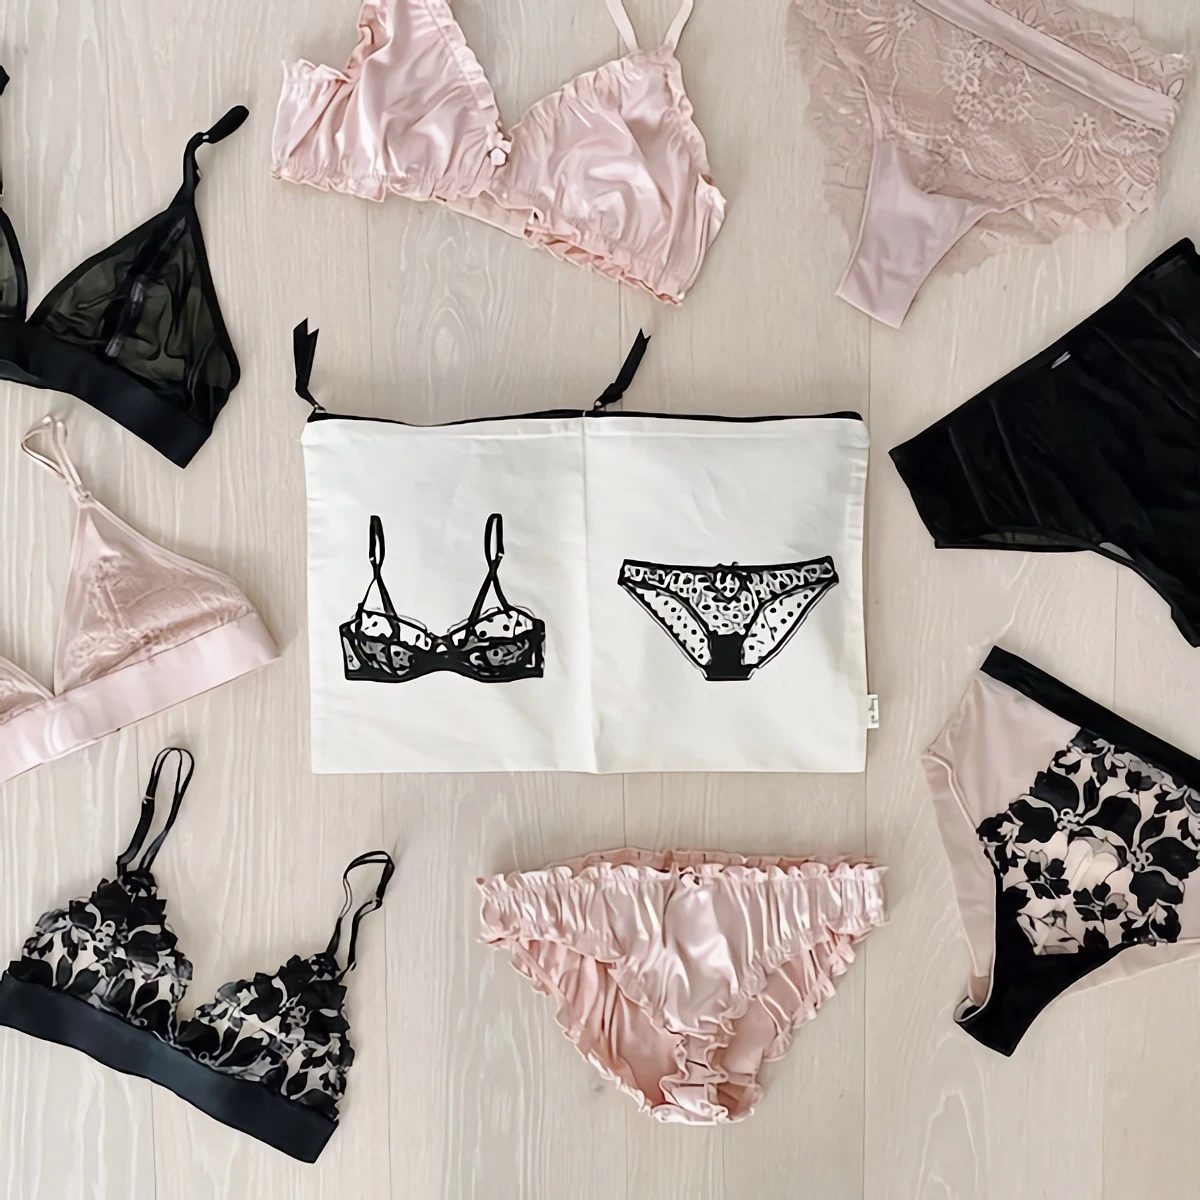 lingerie and lingerie bags